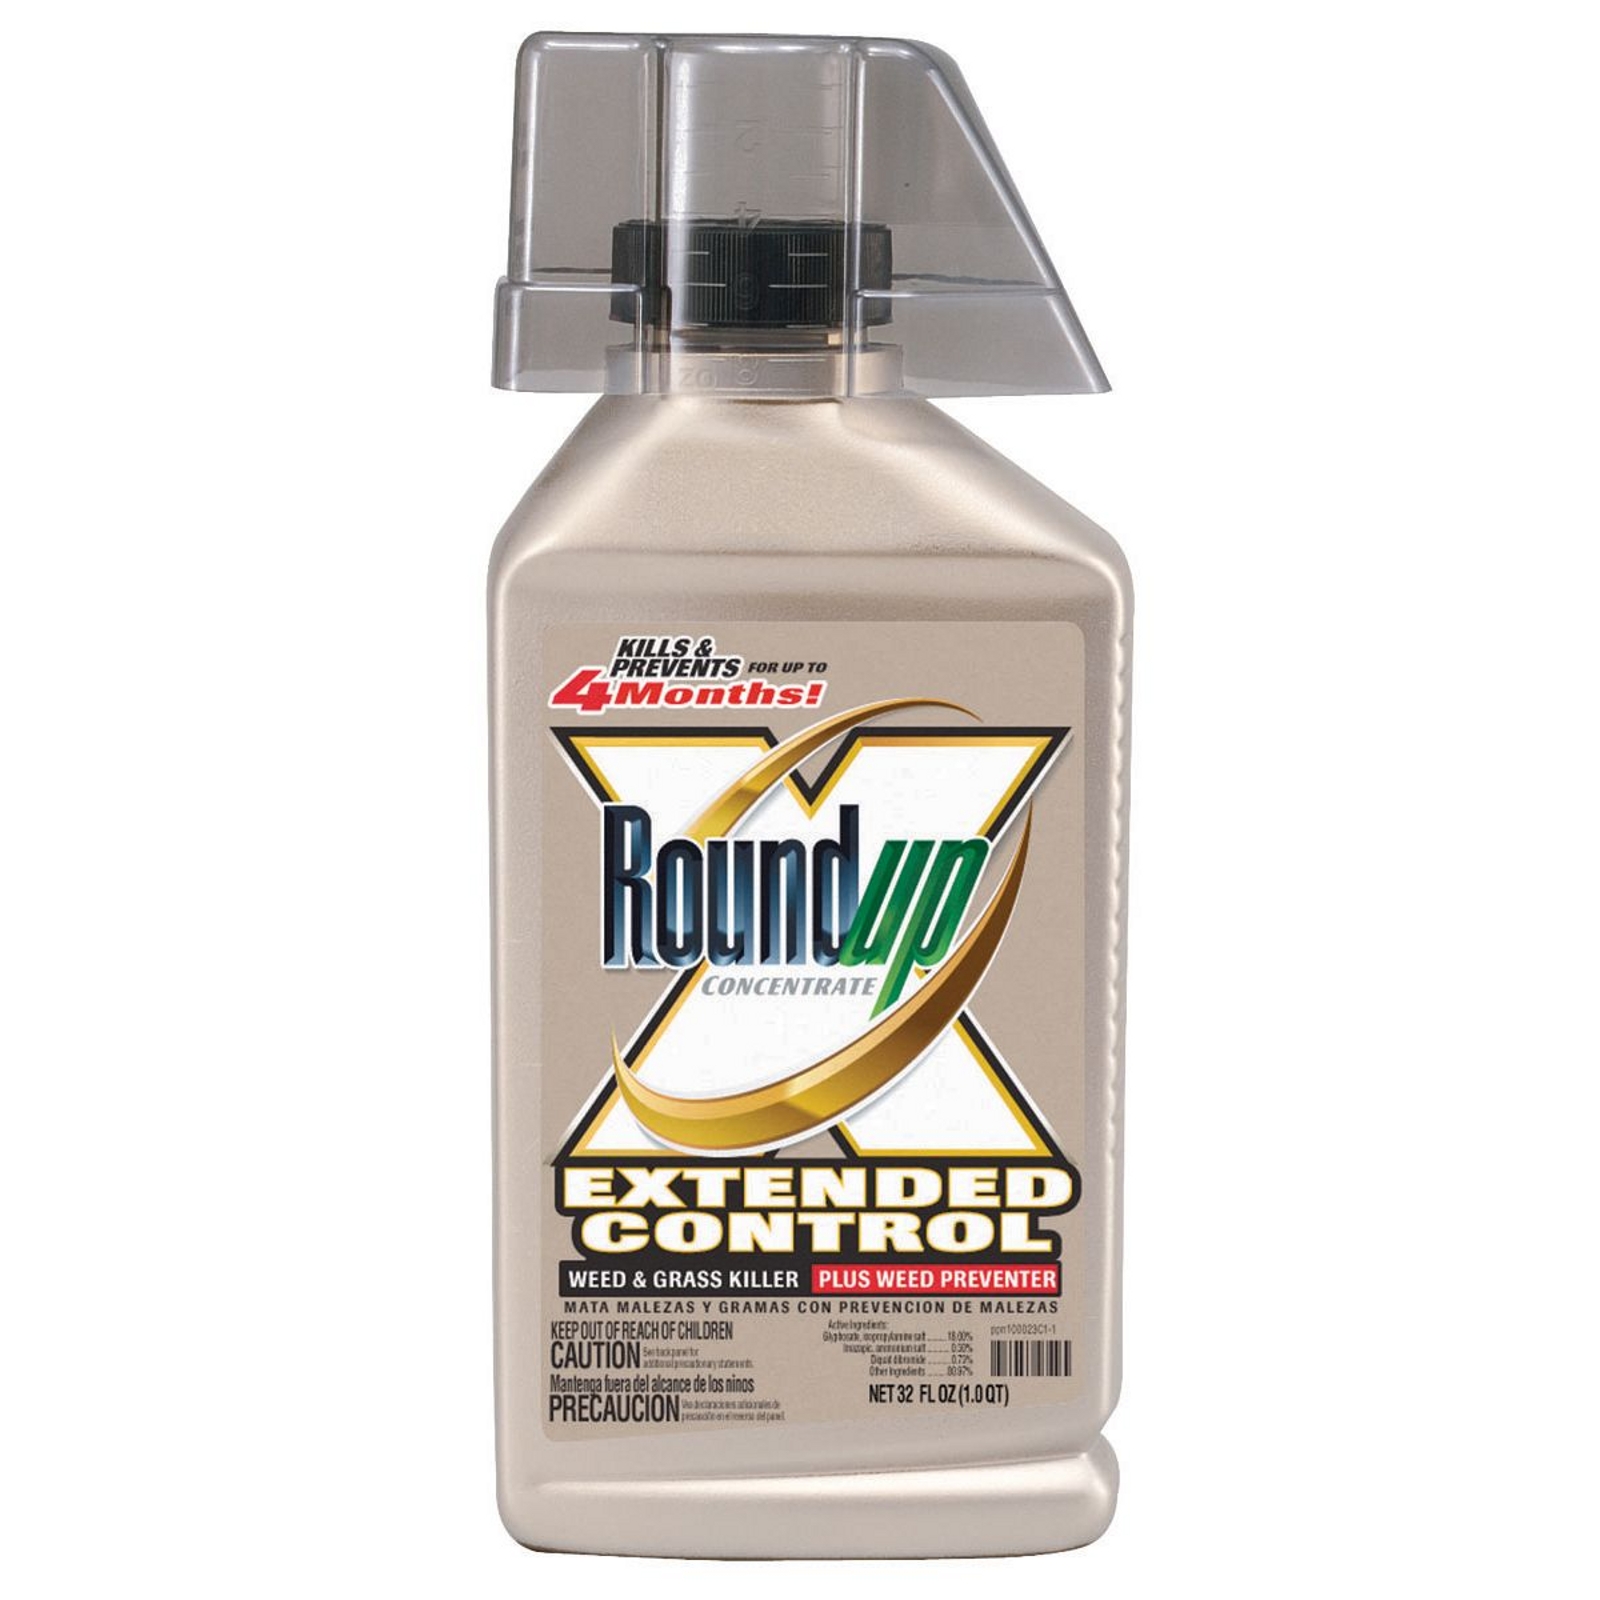 Roundup 5705010 Concentrate Extended Control Weed & Grass Killer Plus Weed Preventer 32 Ounce